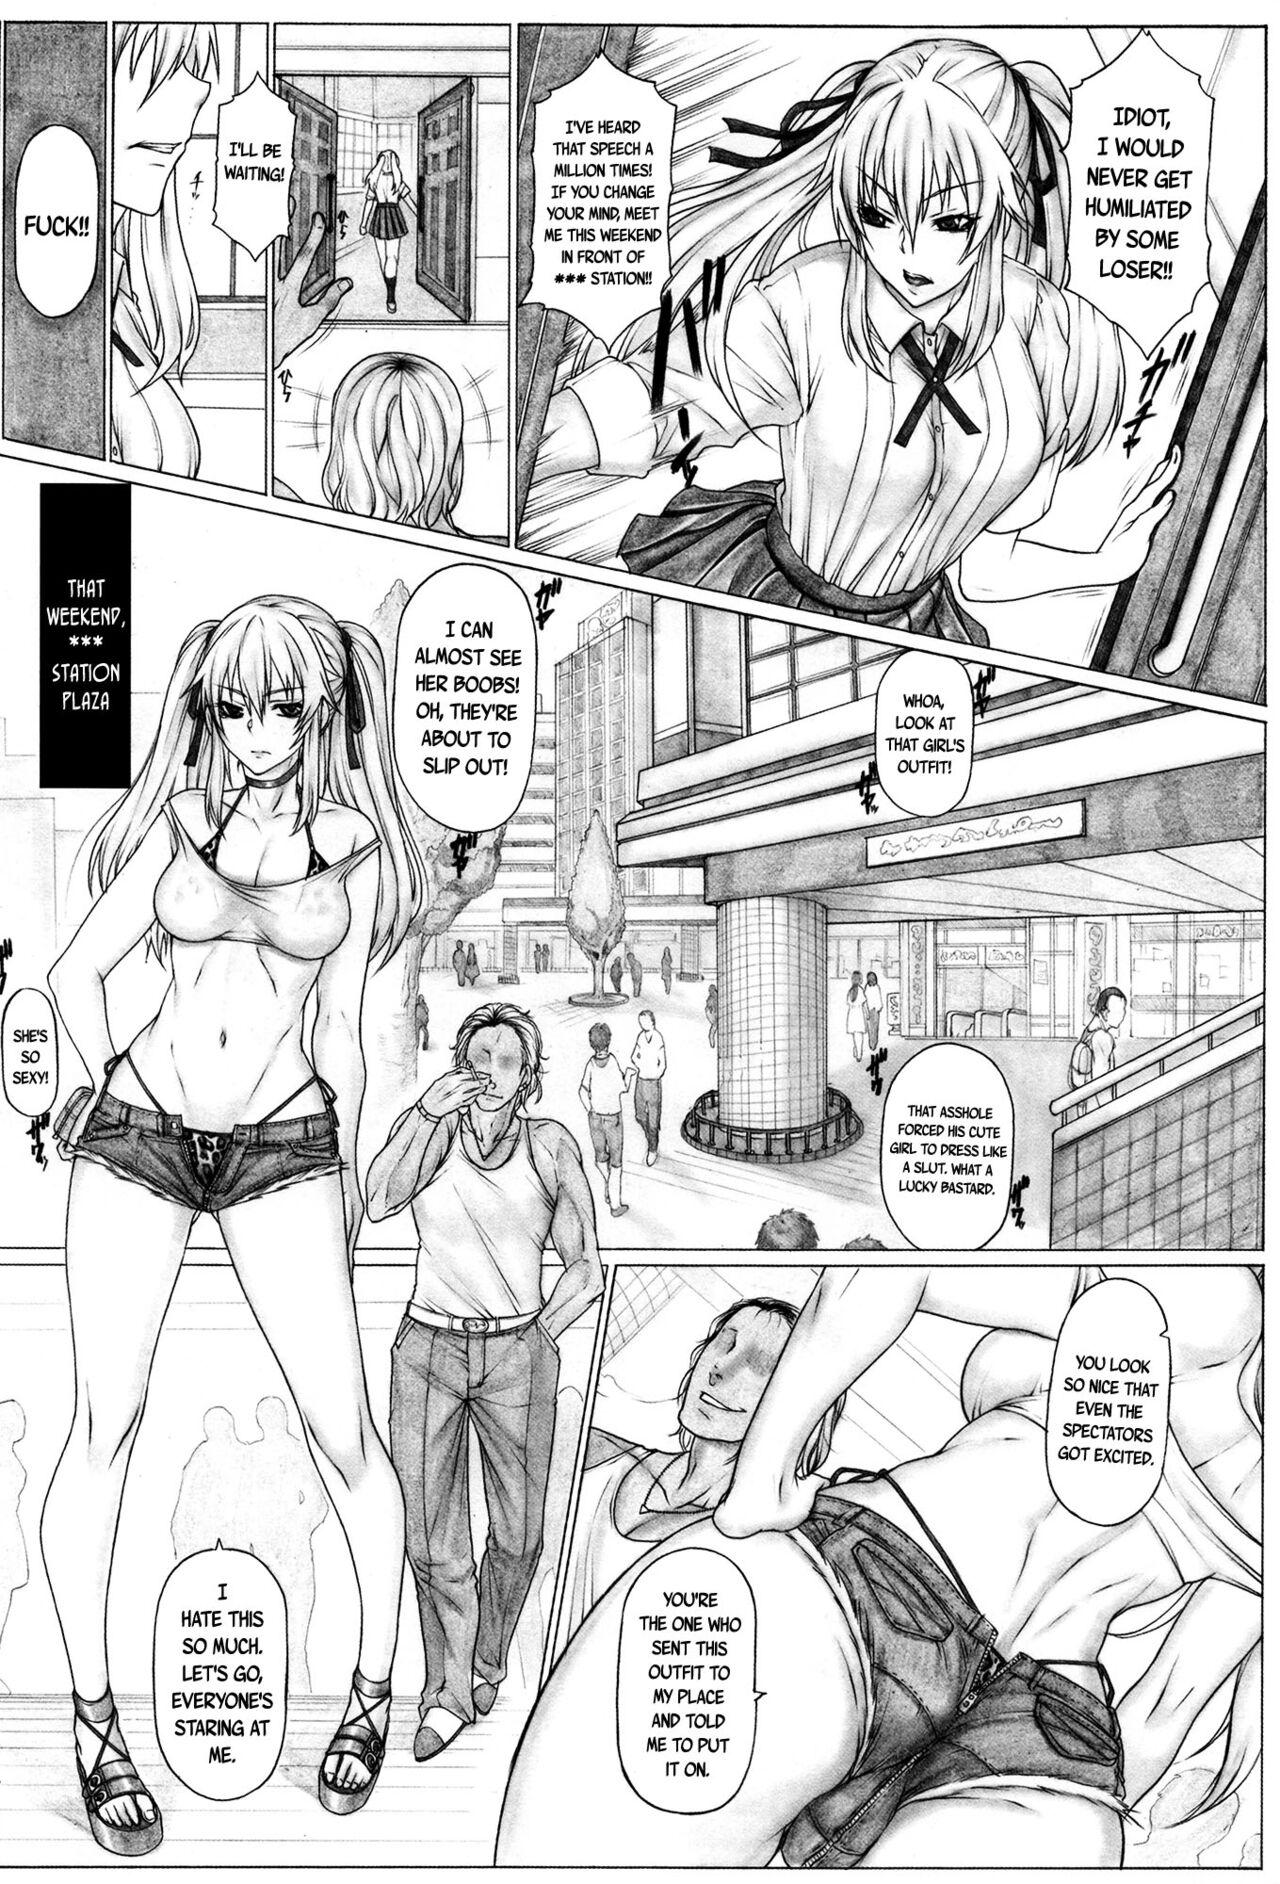 (C100) [AXZ (Kutani)] Angel's Stroke 142 Hamegurui 5th Shot Sex Showdown About Cumming 5 Times With Just One Condom And There's 50 million Yen On The Line [English] {Doujins.com}. 4